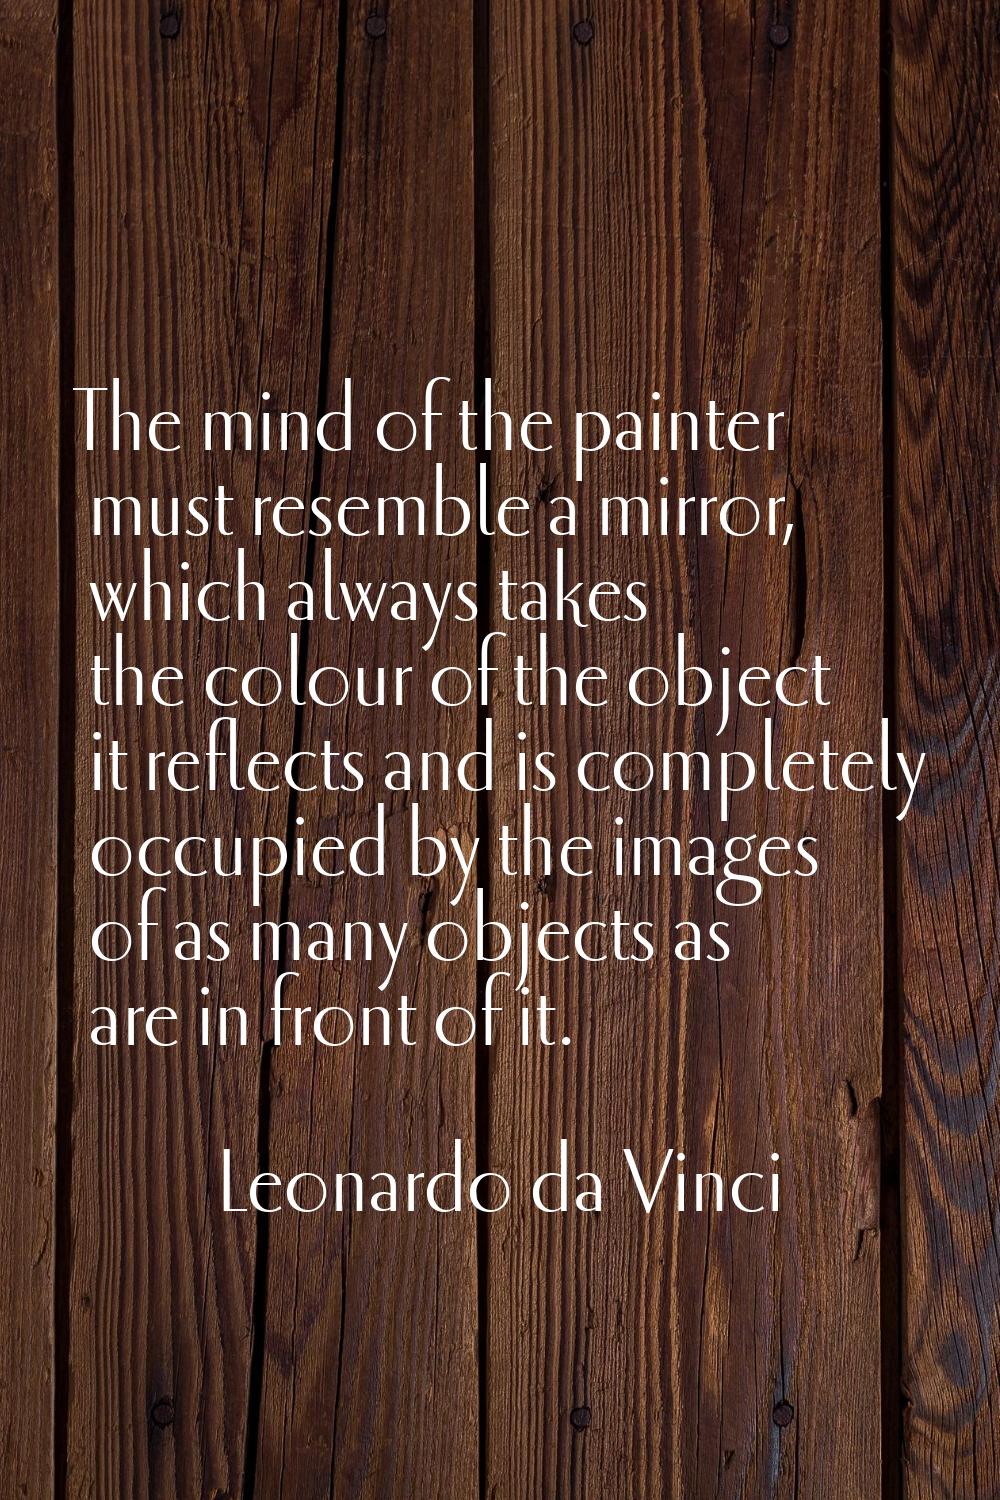 The mind of the painter must resemble a mirror, which always takes the colour of the object it refl